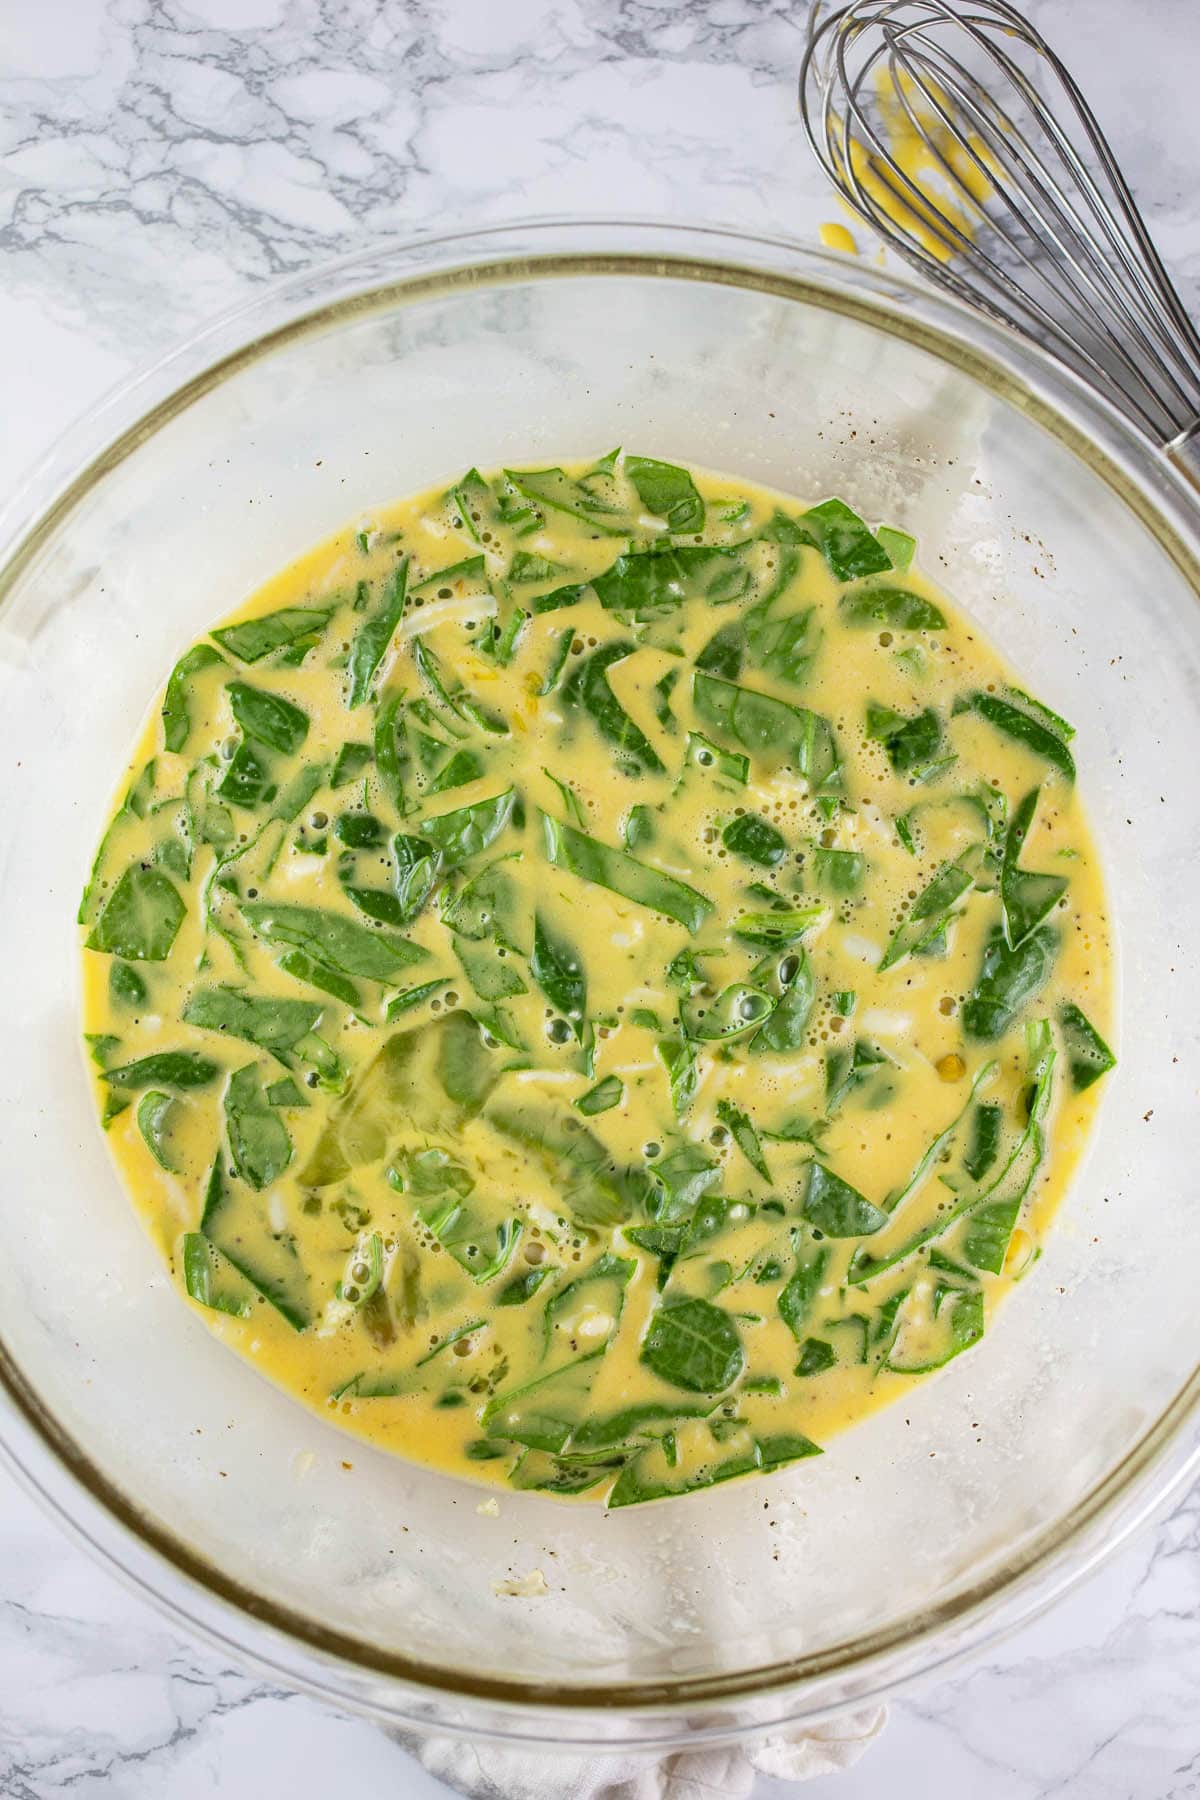 Egg mixture with chopped spinach in large glass mixing bowl.